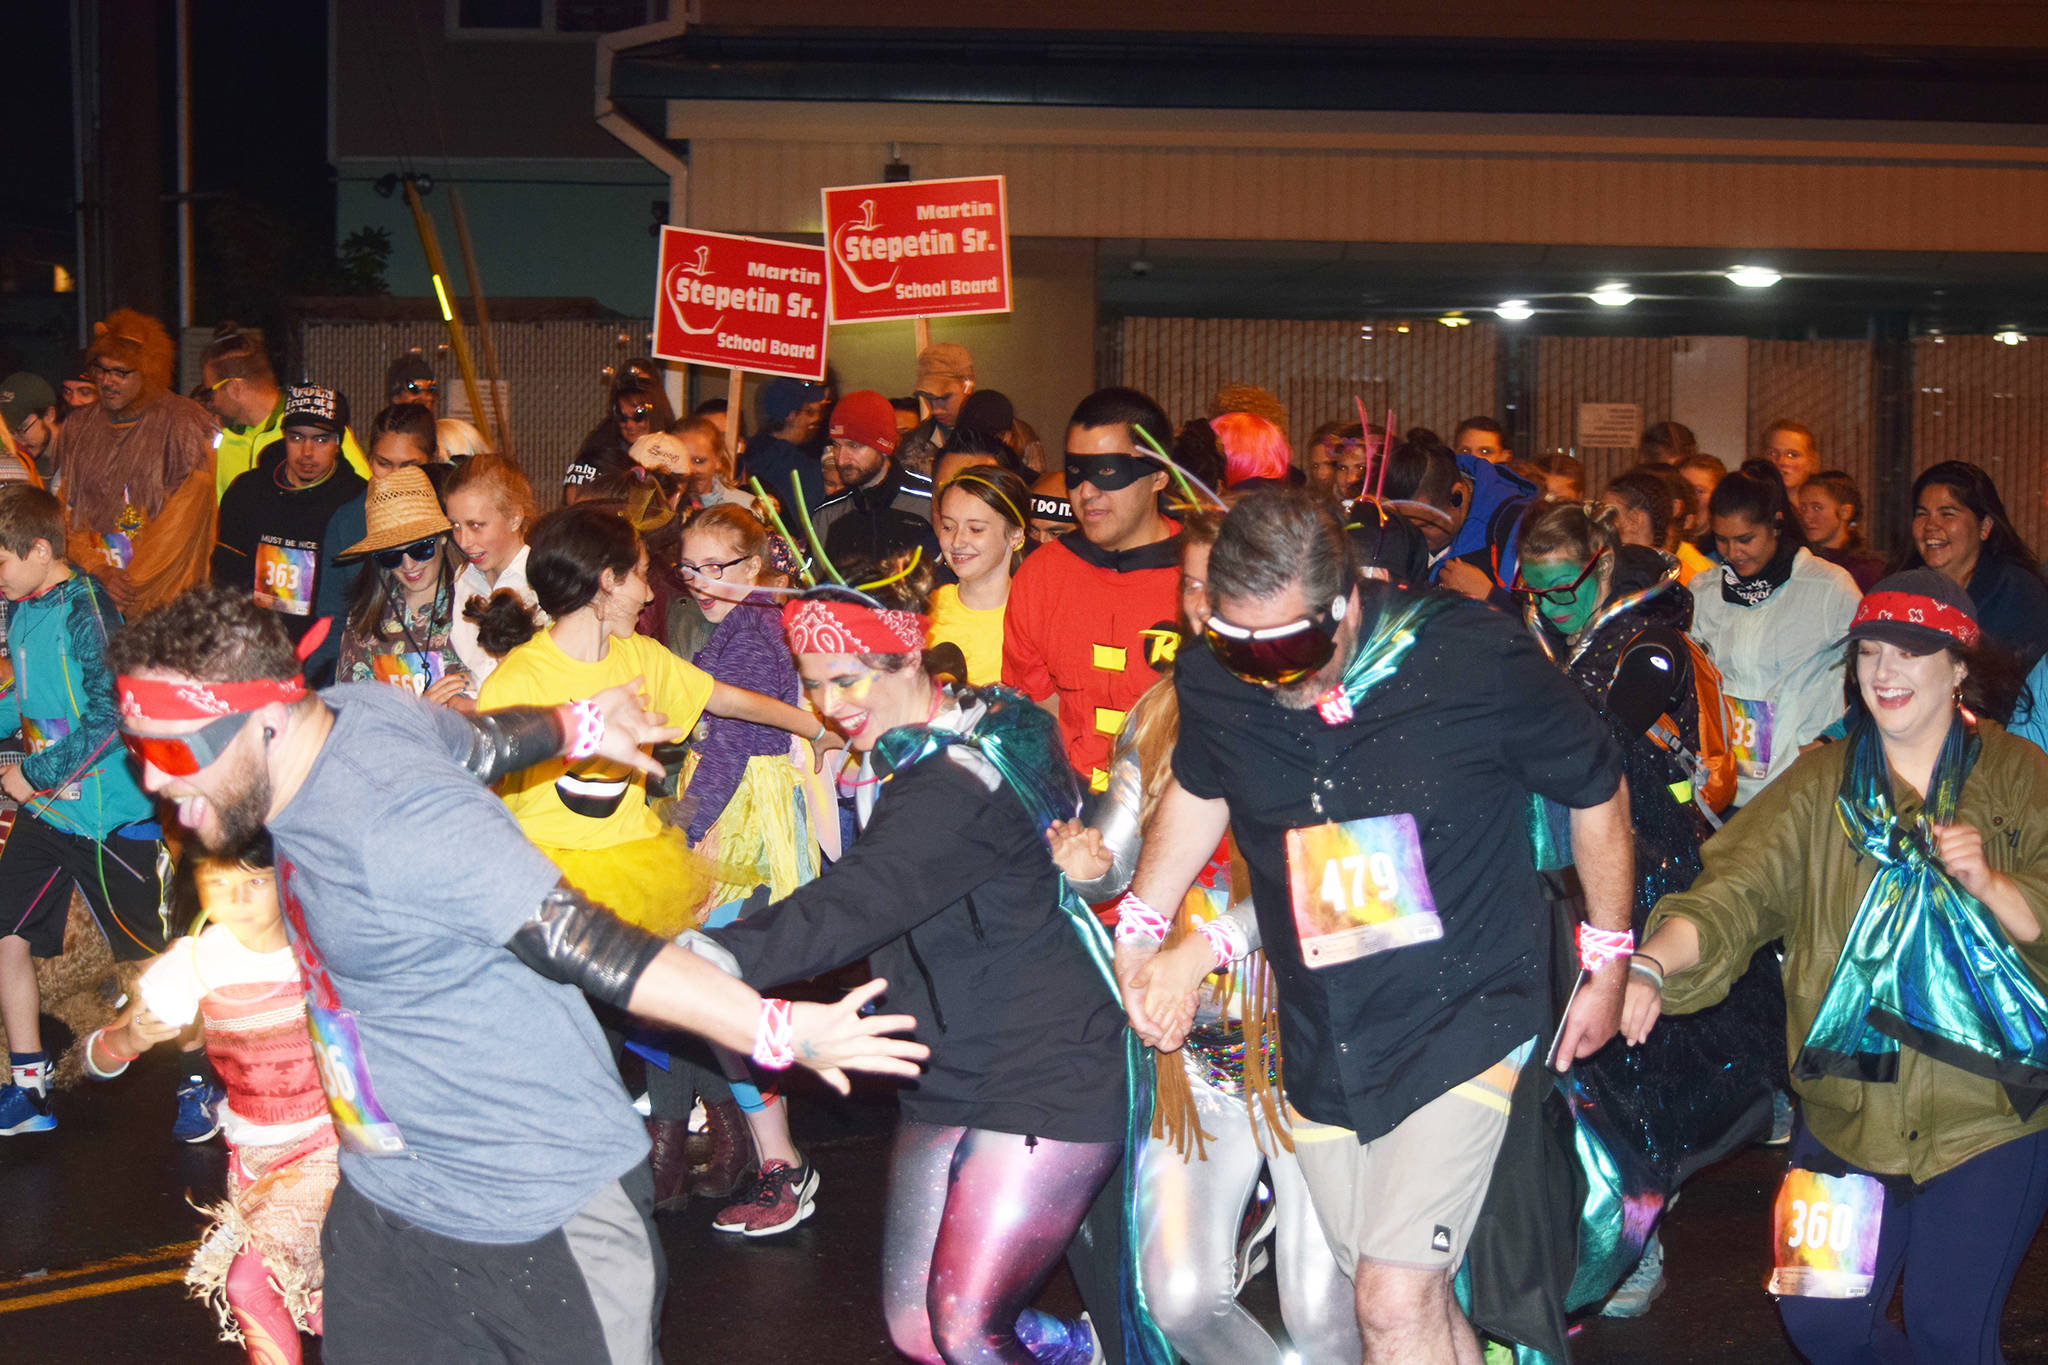 Emojis and caterpillars: Fools run attracts eclectic crowd